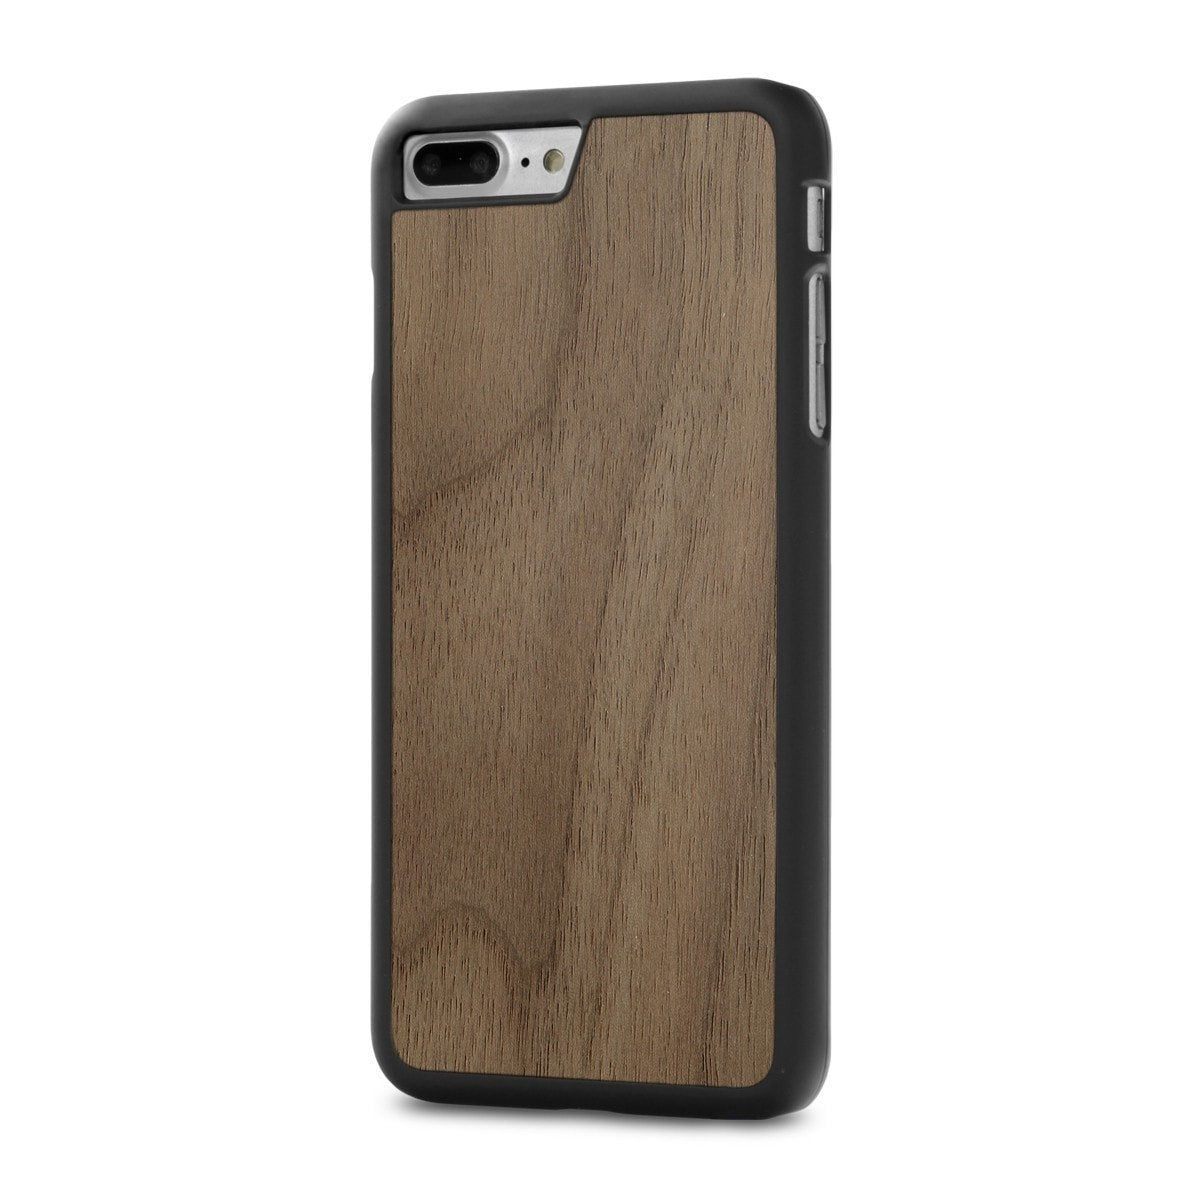  iPhone 8 Plus —  #WoodBack Snap Case - Cover-Up - 1